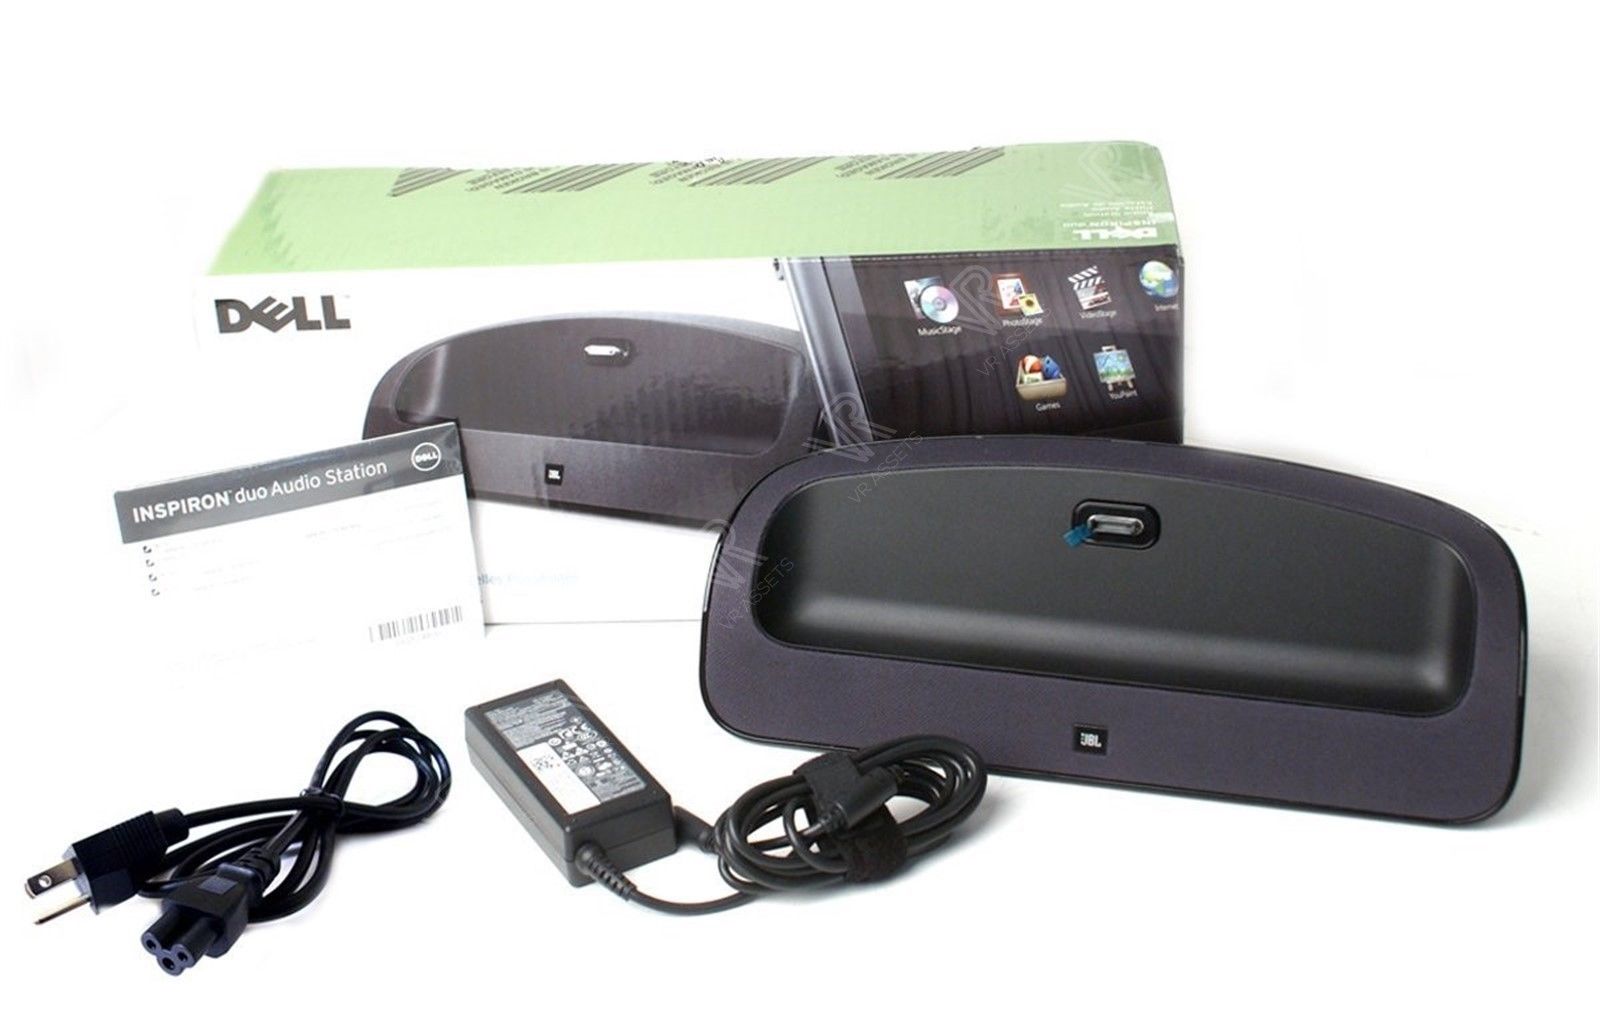 Dell Inspiron Duo 1090 Audio Station With AC Adapter 9hcmg Wmfd4 for sale online 